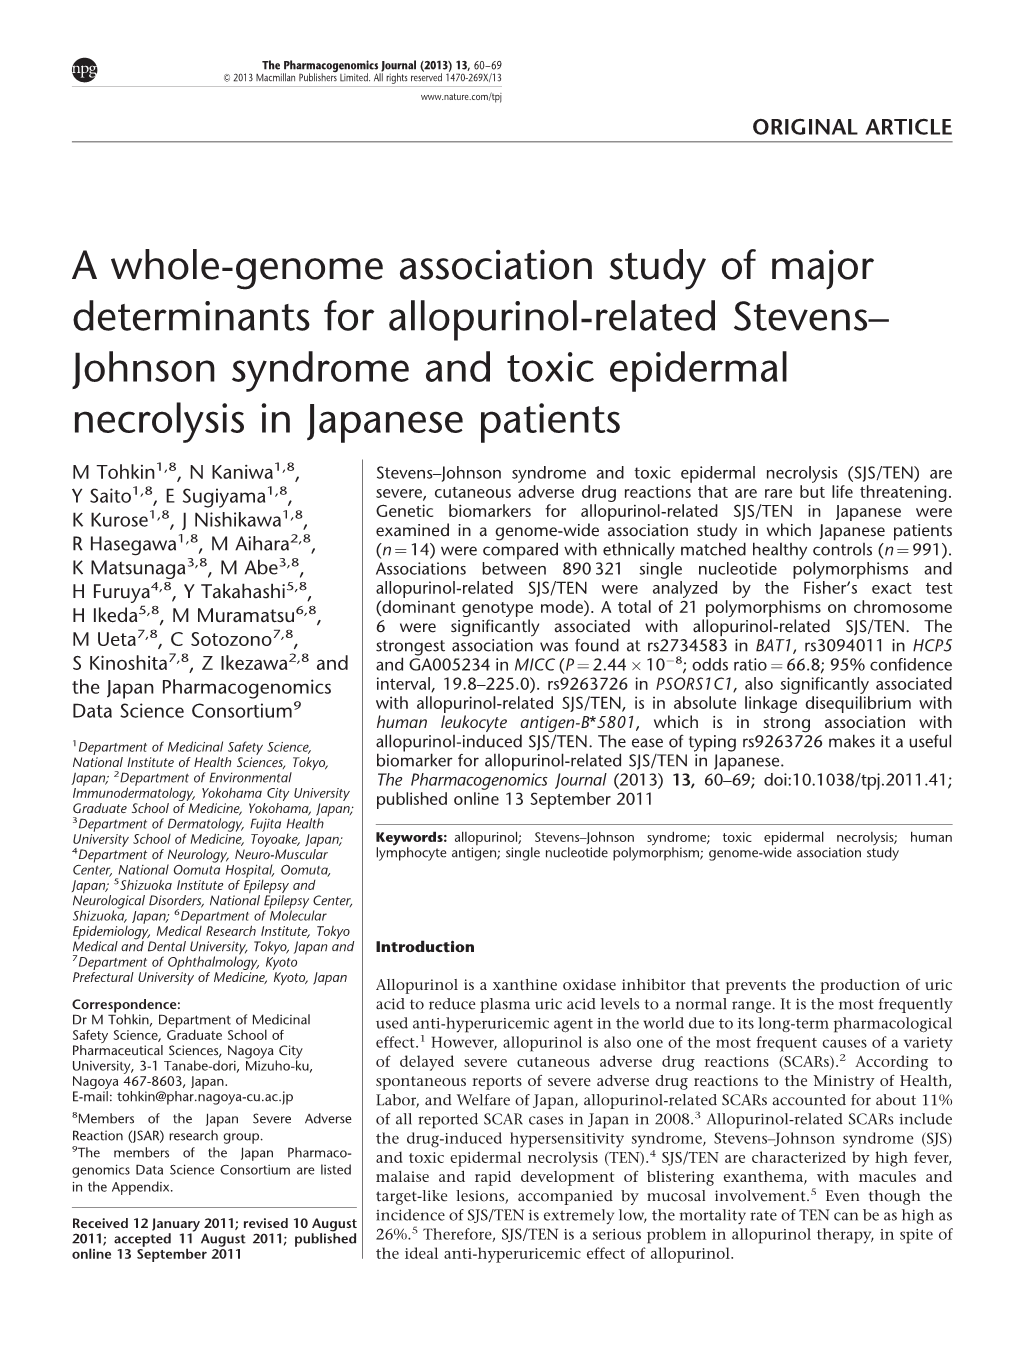 Johnson Syndrome and Toxic Epidermal Necrolysis in Japanese Patients